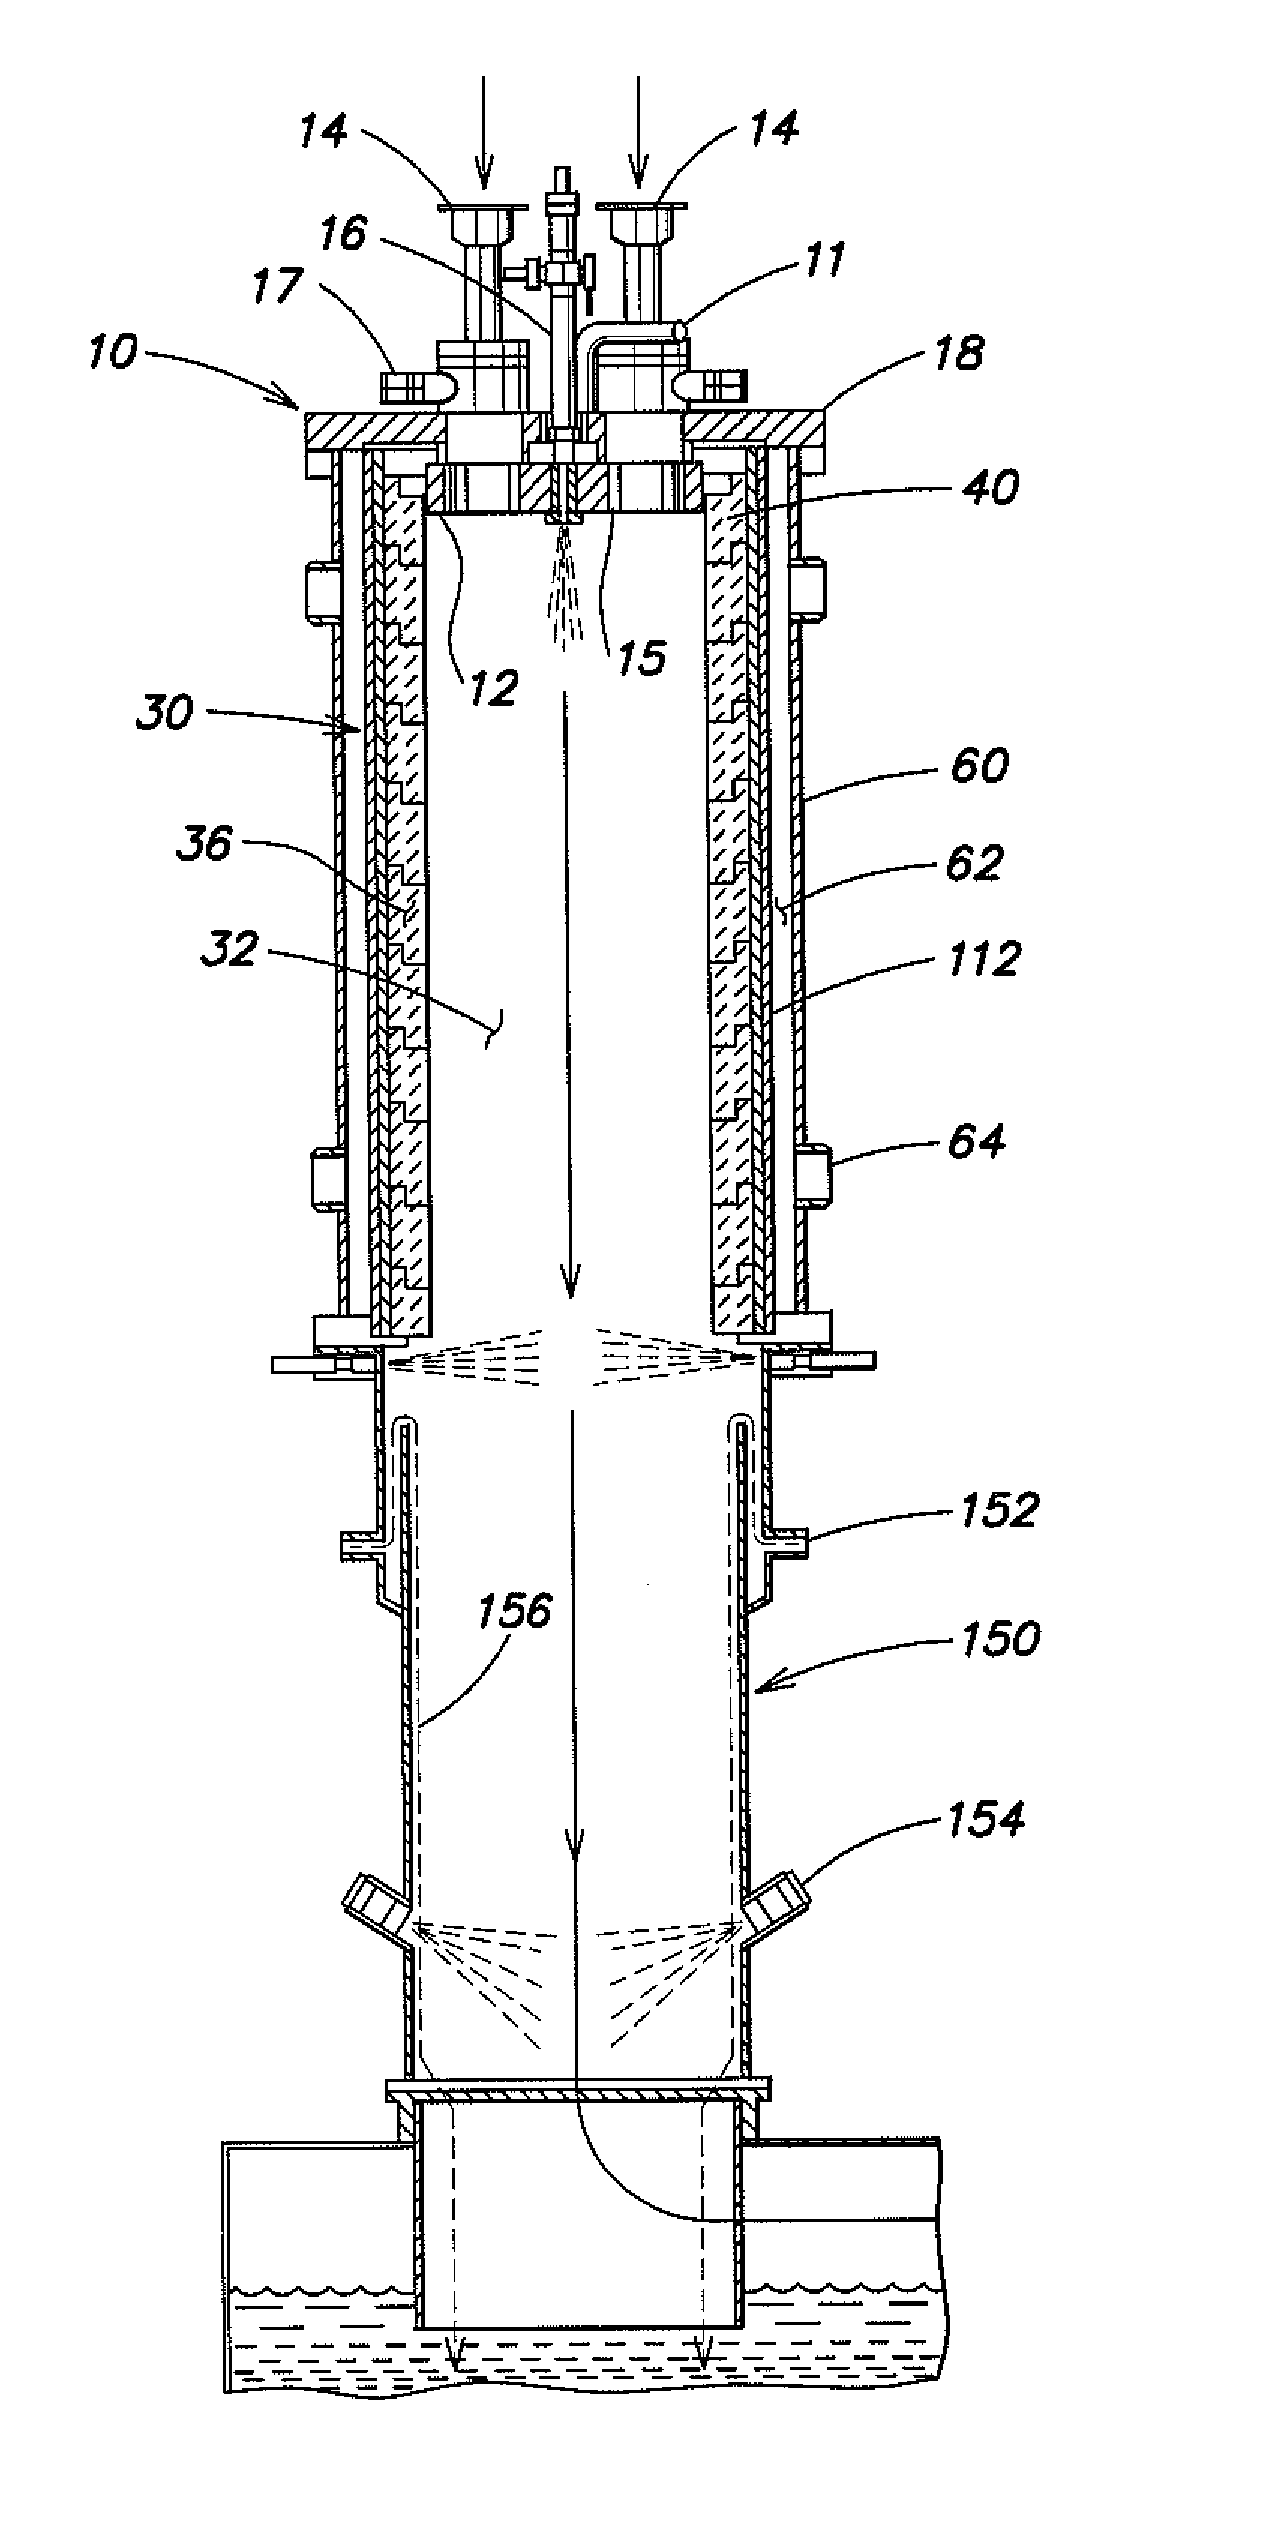 Methods and apparatus for manufacturing a process abatement reactor